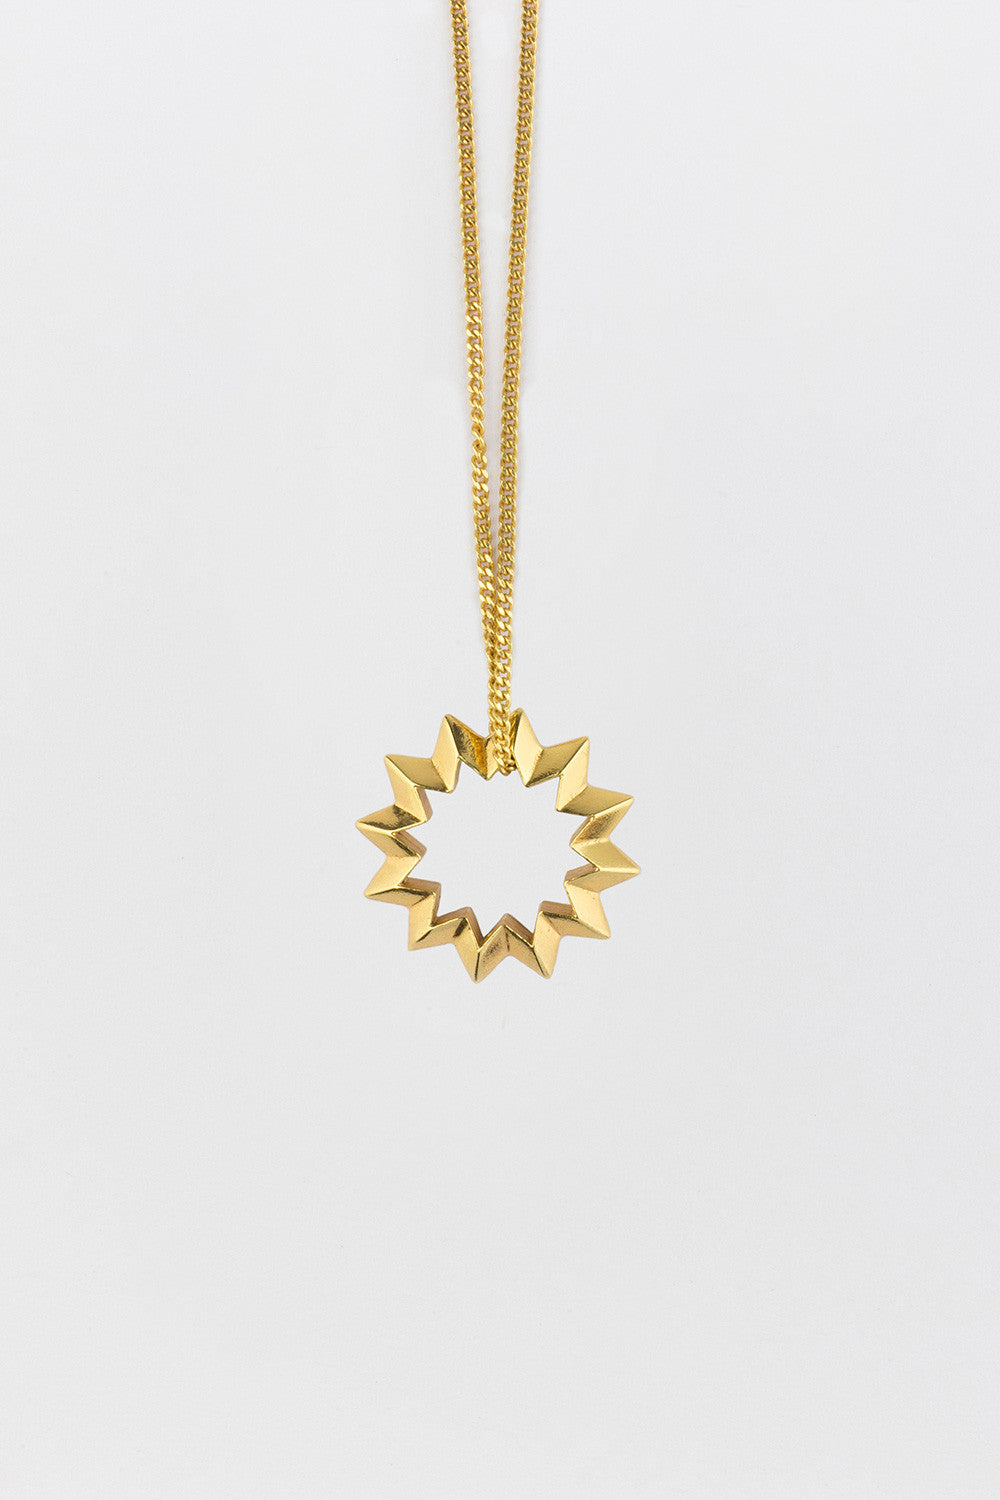 Shock (Star) Necklace Gold